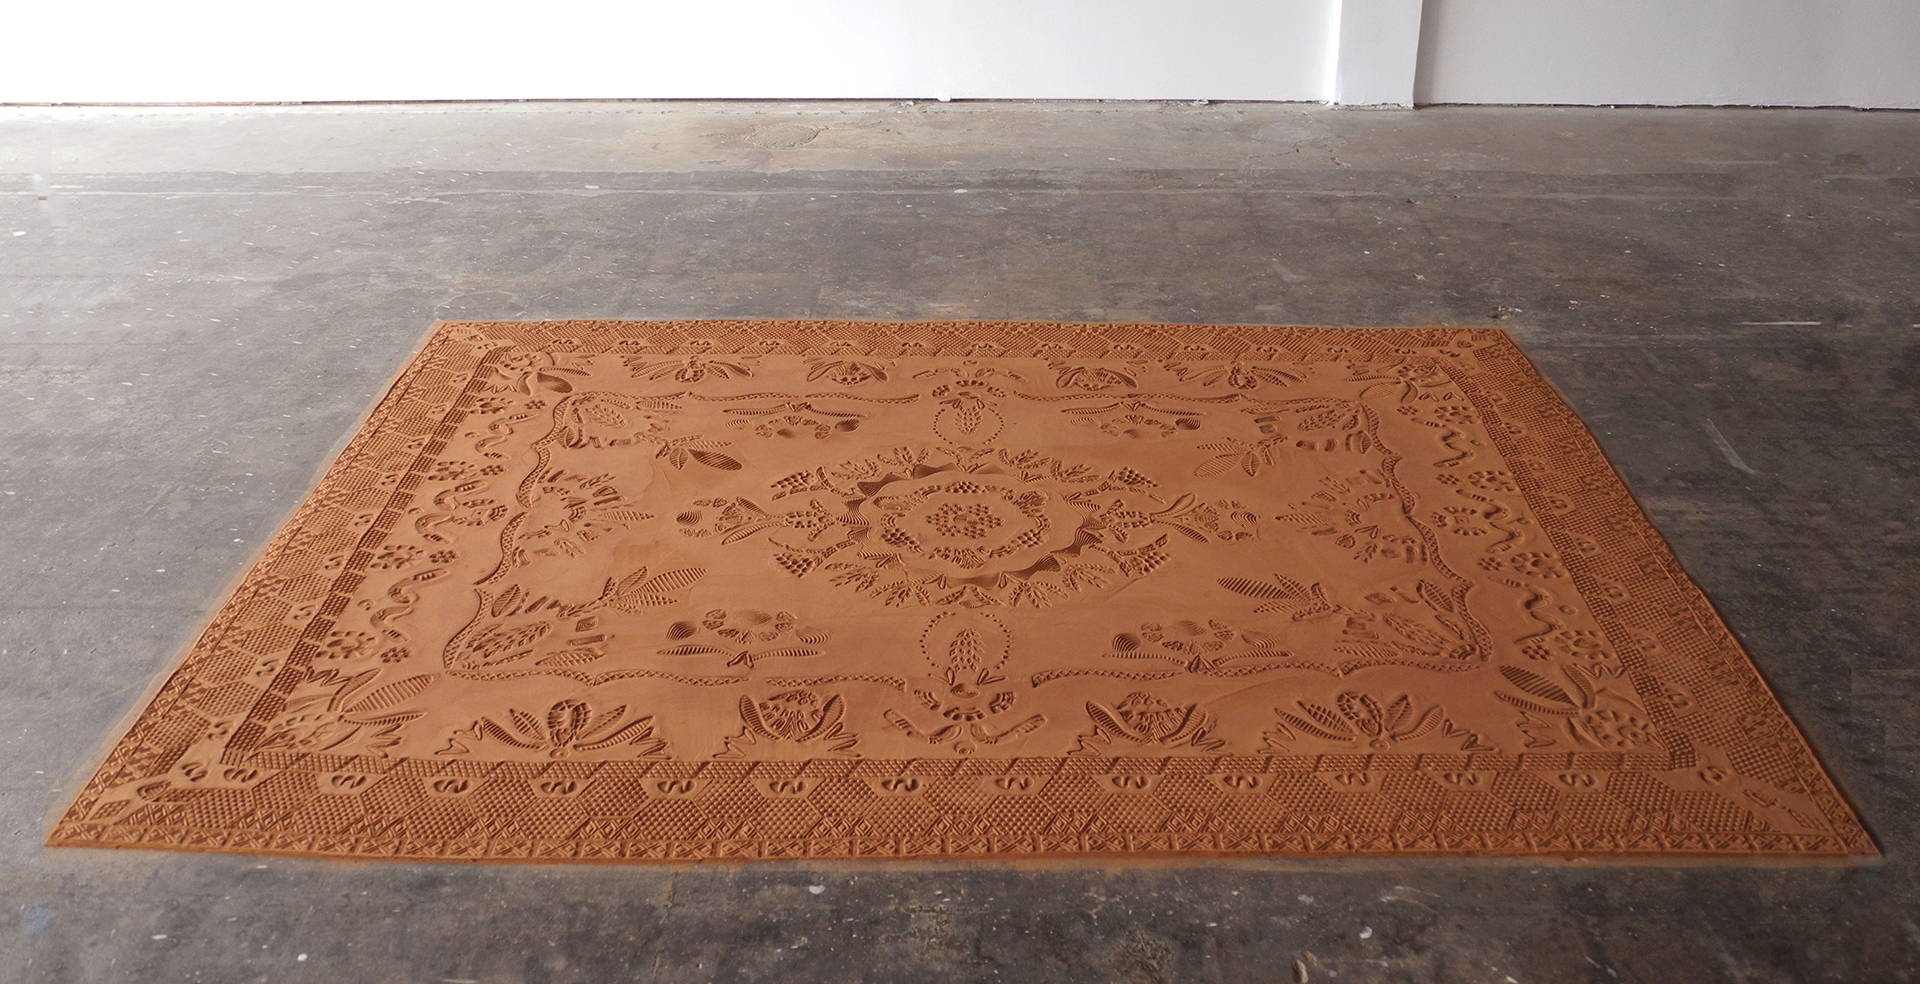 Low relief sculpture mimicking an intricate patterned rug, made with modified shoe soles imprinting ground & sifted Oklahoma red dirt